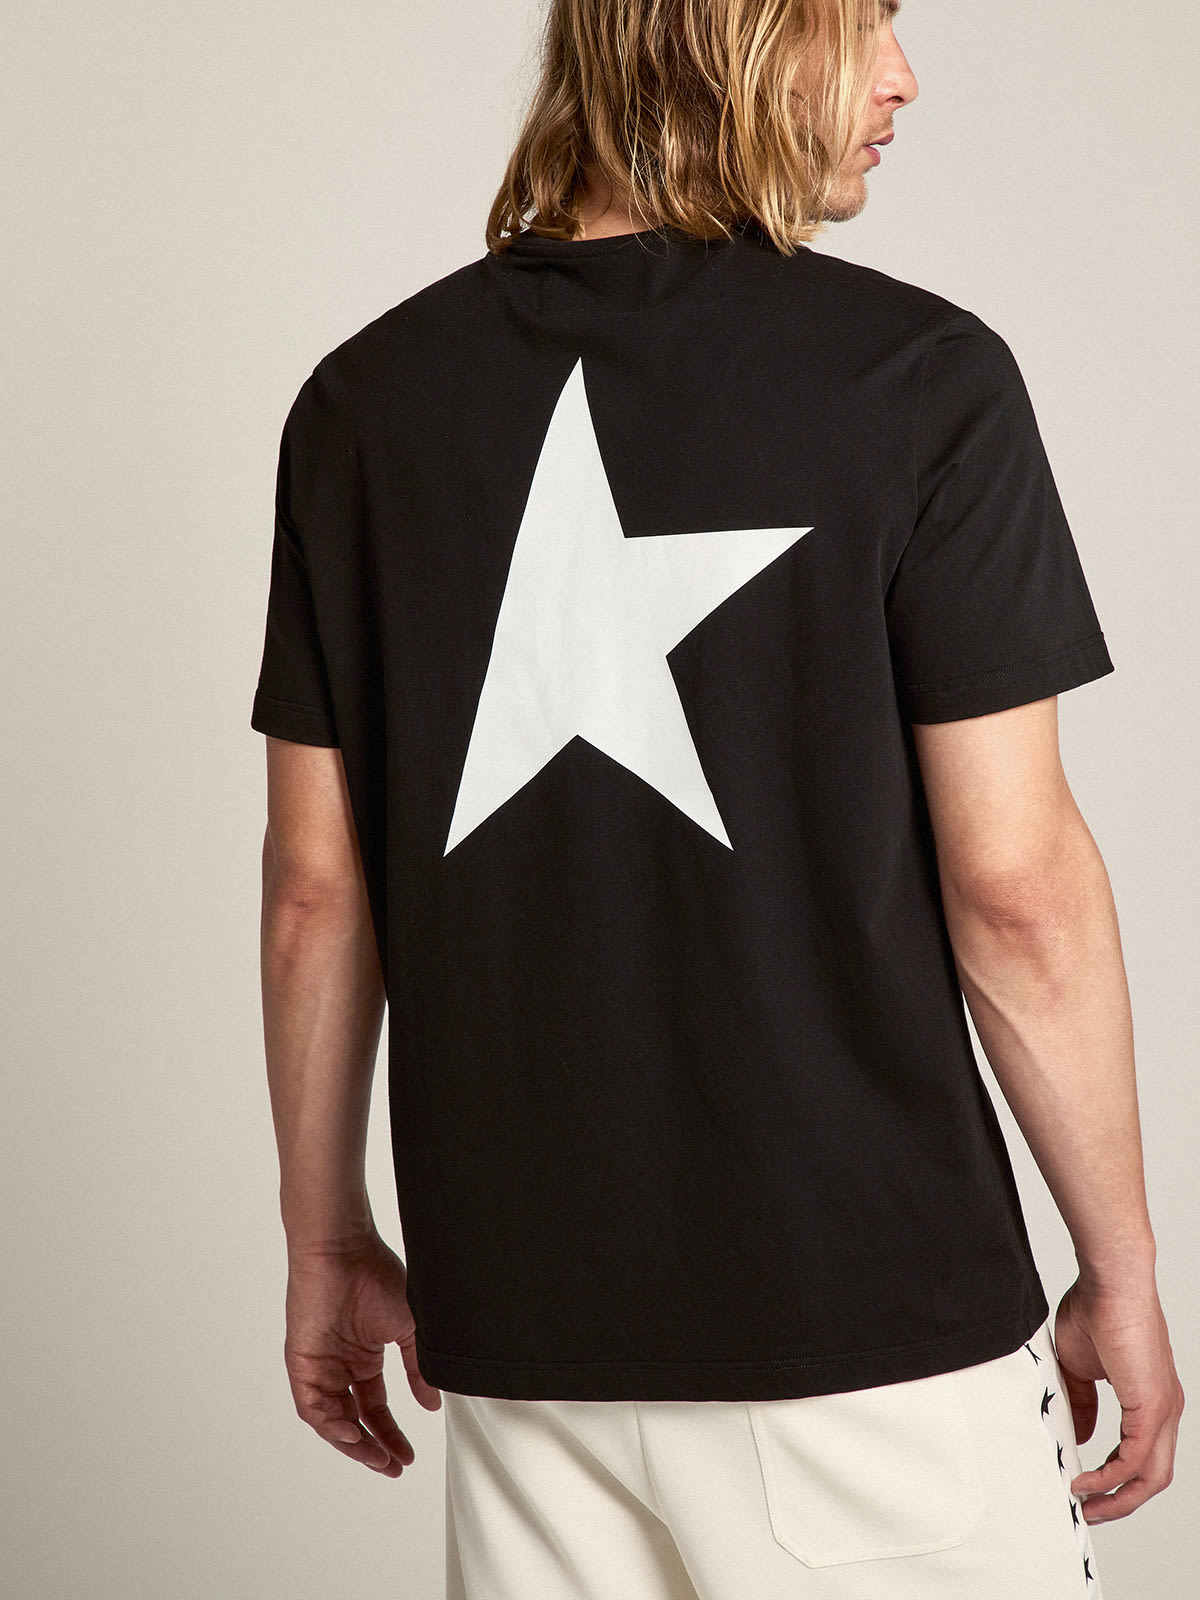 Golden Goose - Men's black T-shirt with contrasting white logo and star in 